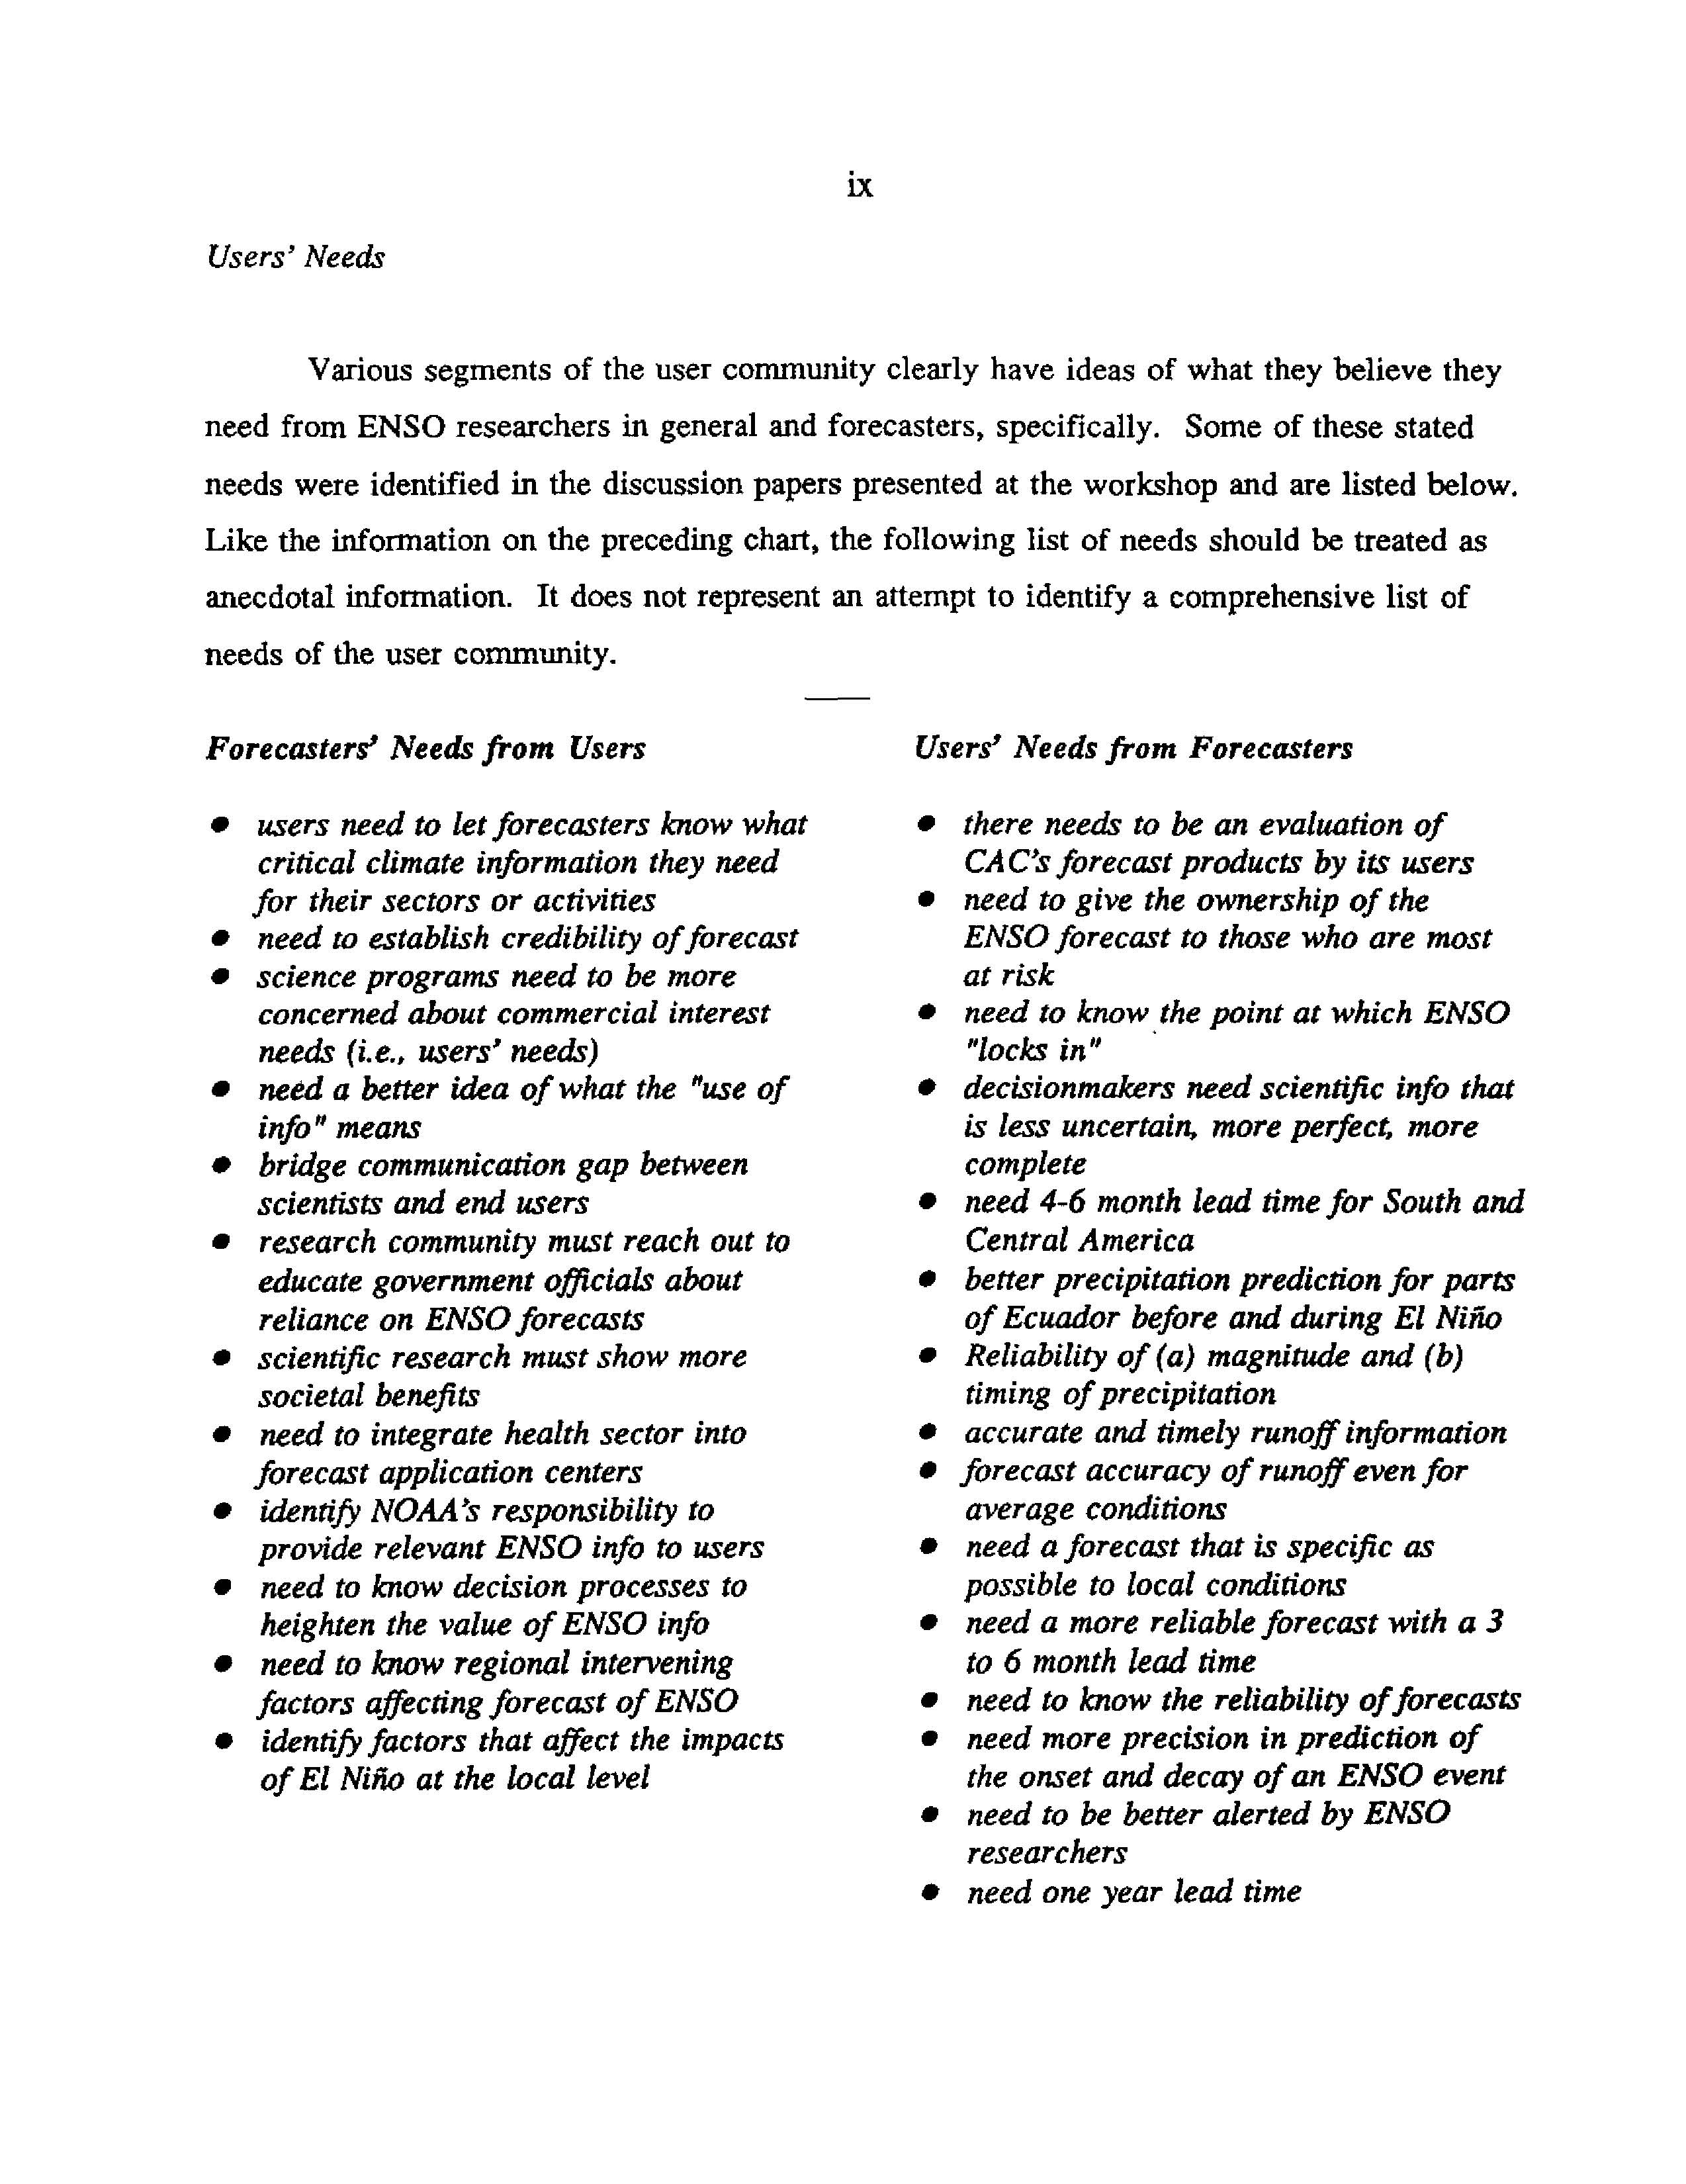 The Potential Use and Misuse of El Nino Information 1994_Page_2